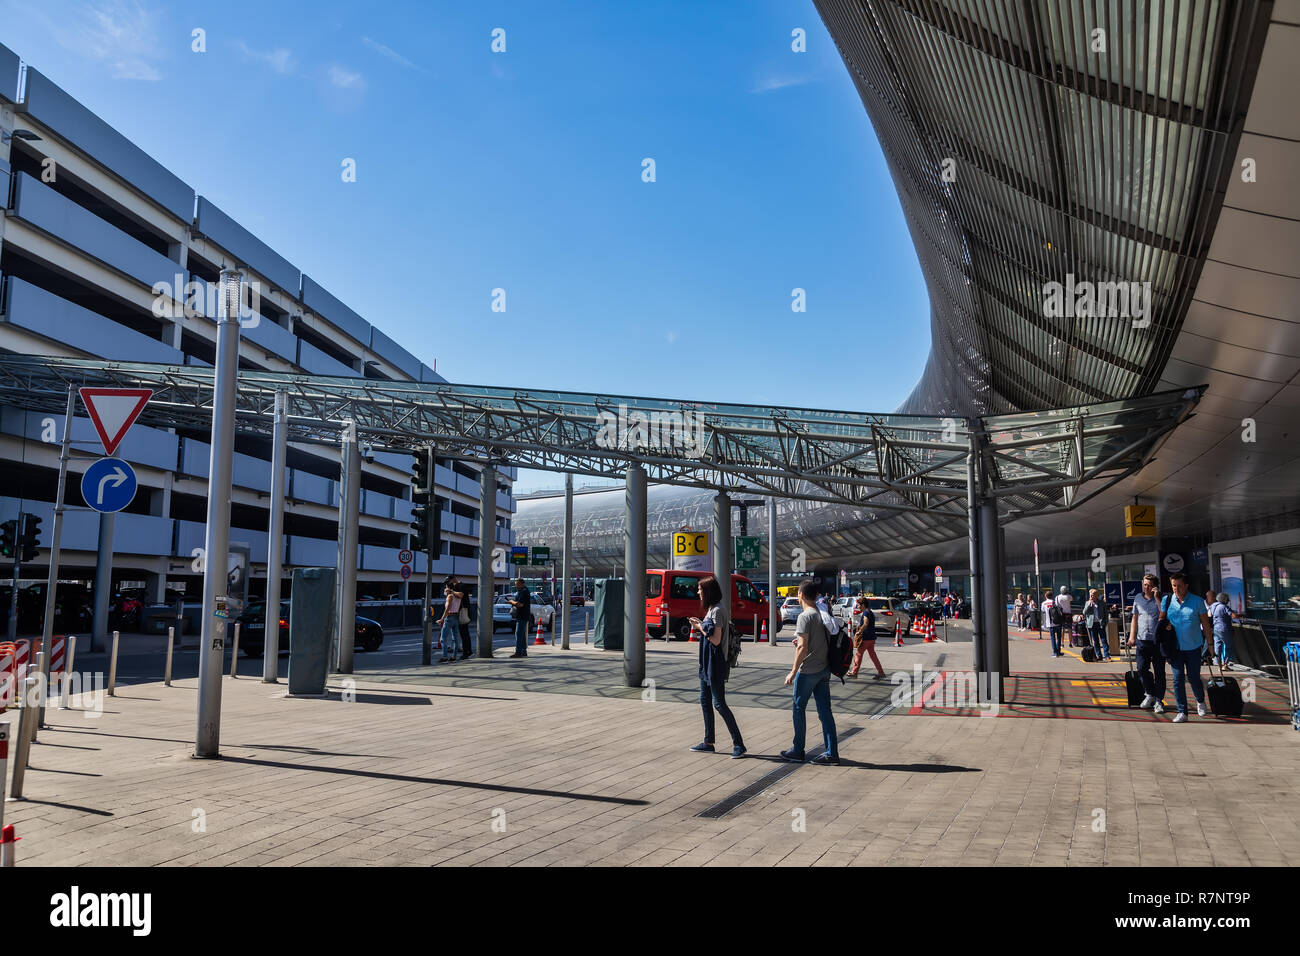 Dusseldorf, Germany - July 3, 2018: exterior view of Dusseldorf International Airport. Dusseldorf Airport located approximately 7 kilometres north of  Stock Photo